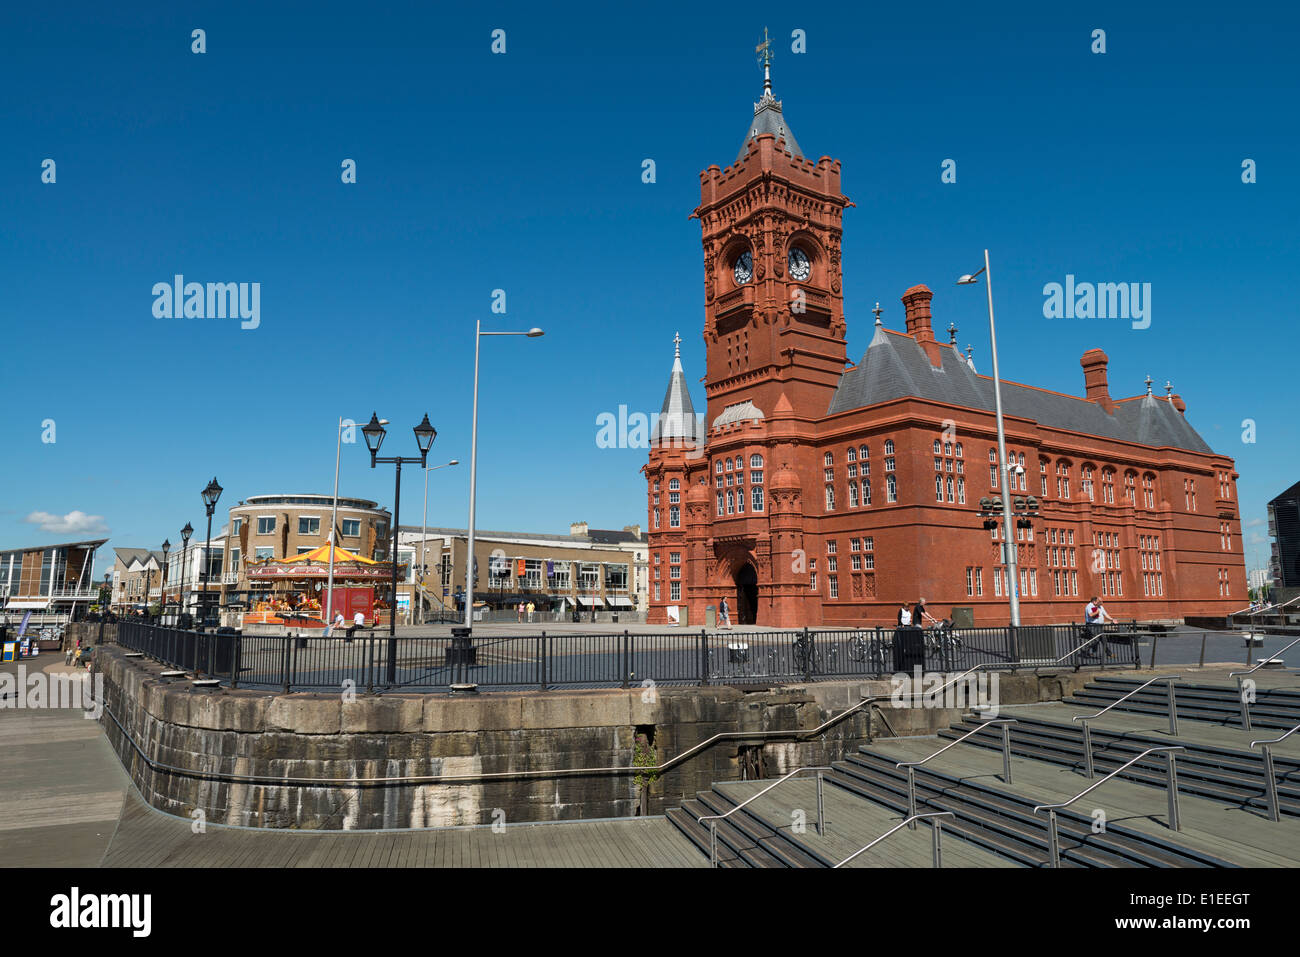 Blue skies over The Pierhead Building and Mermaid Quay, left, Cardiff Bay, South Wales, UK. Stock Photo